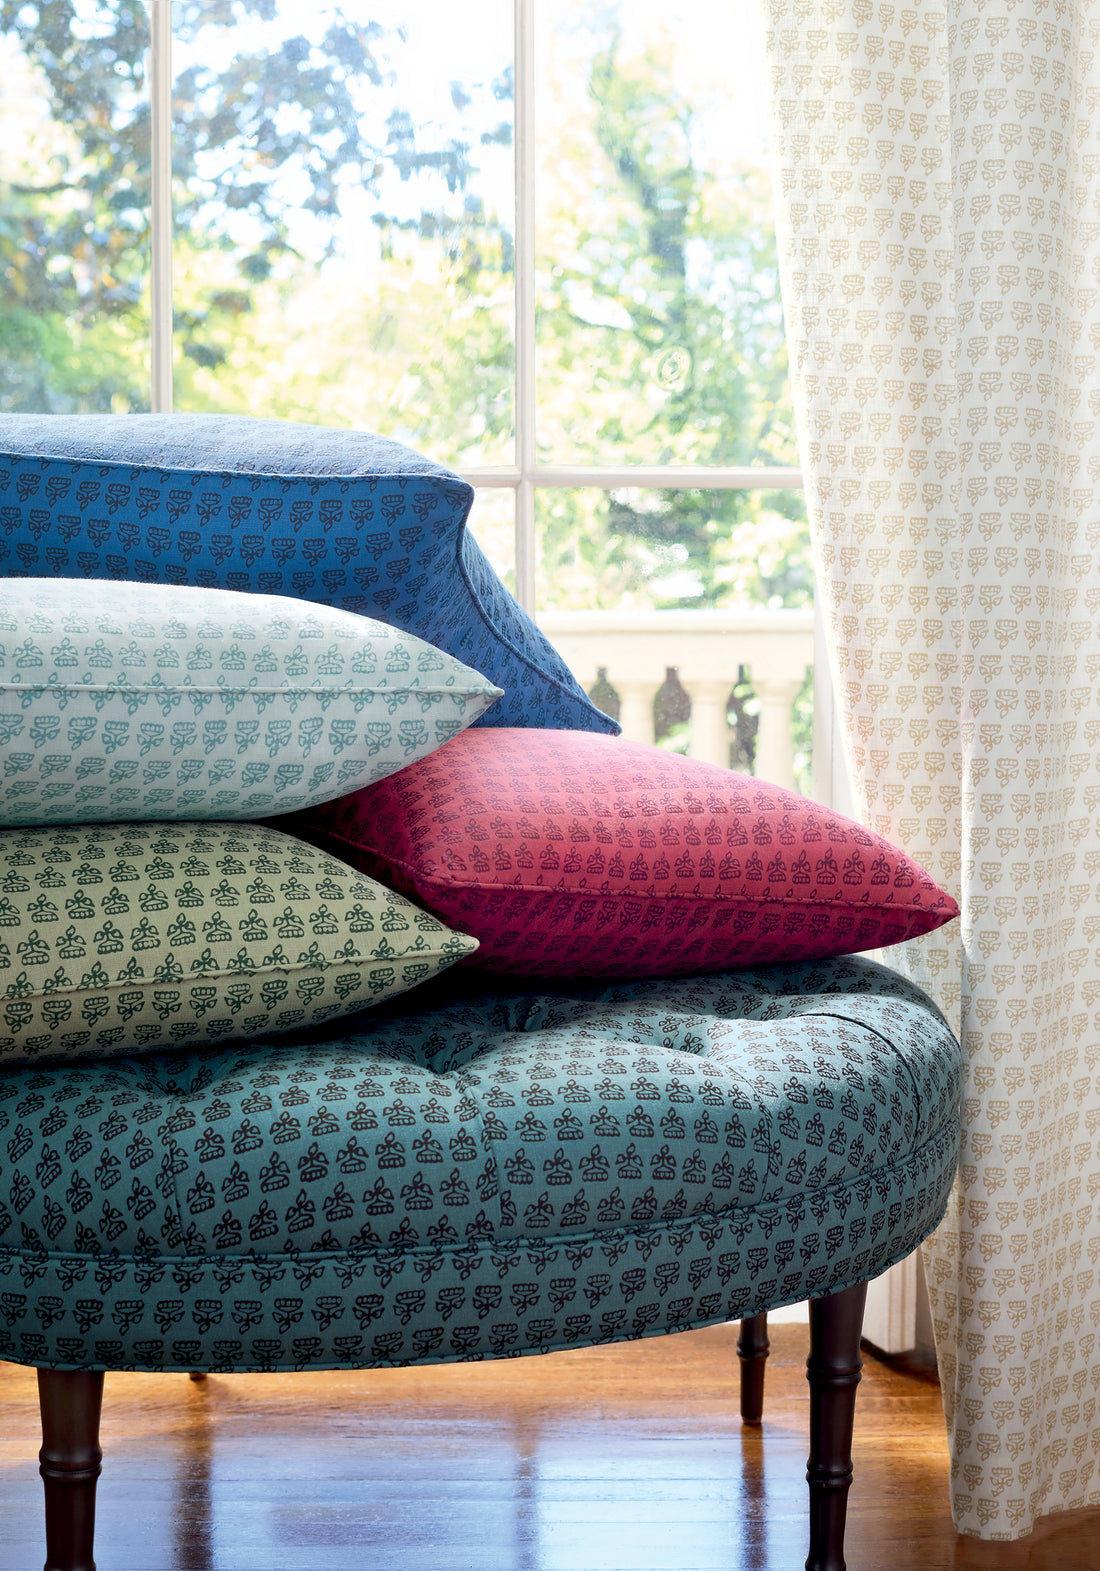 Pillow featuring Mimi fabric in green color - pattern number F936449 - by Thibaut in the Indienne collection